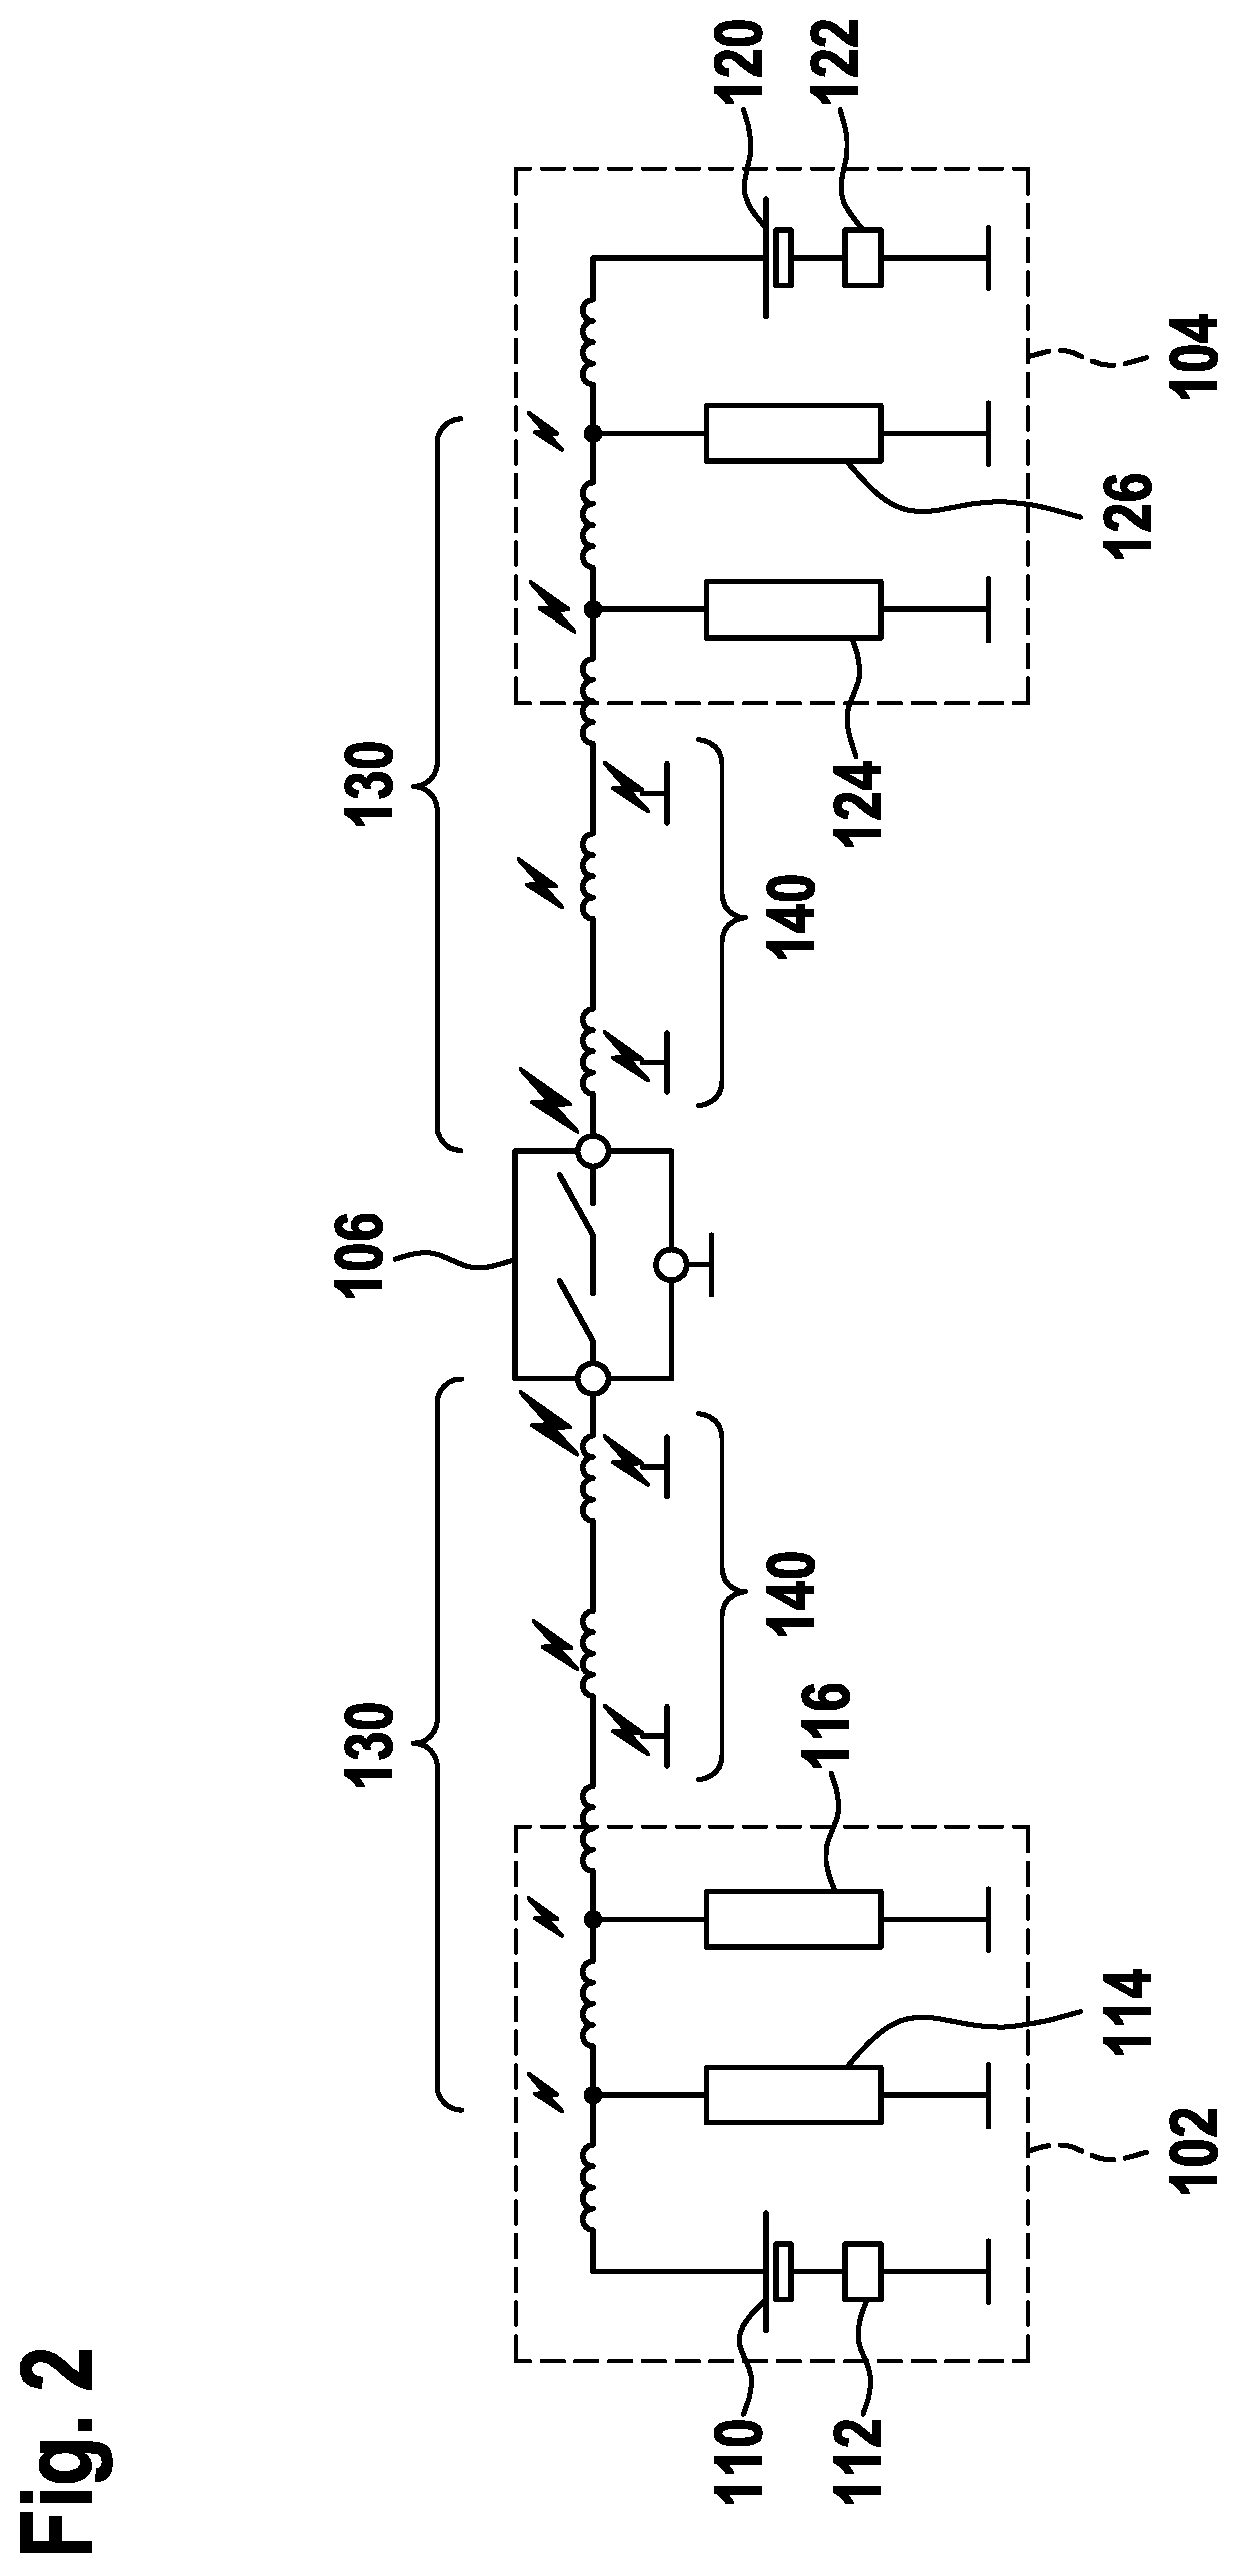 Battery terminal with a star-point connection switch configuration for a vehicle electrical system